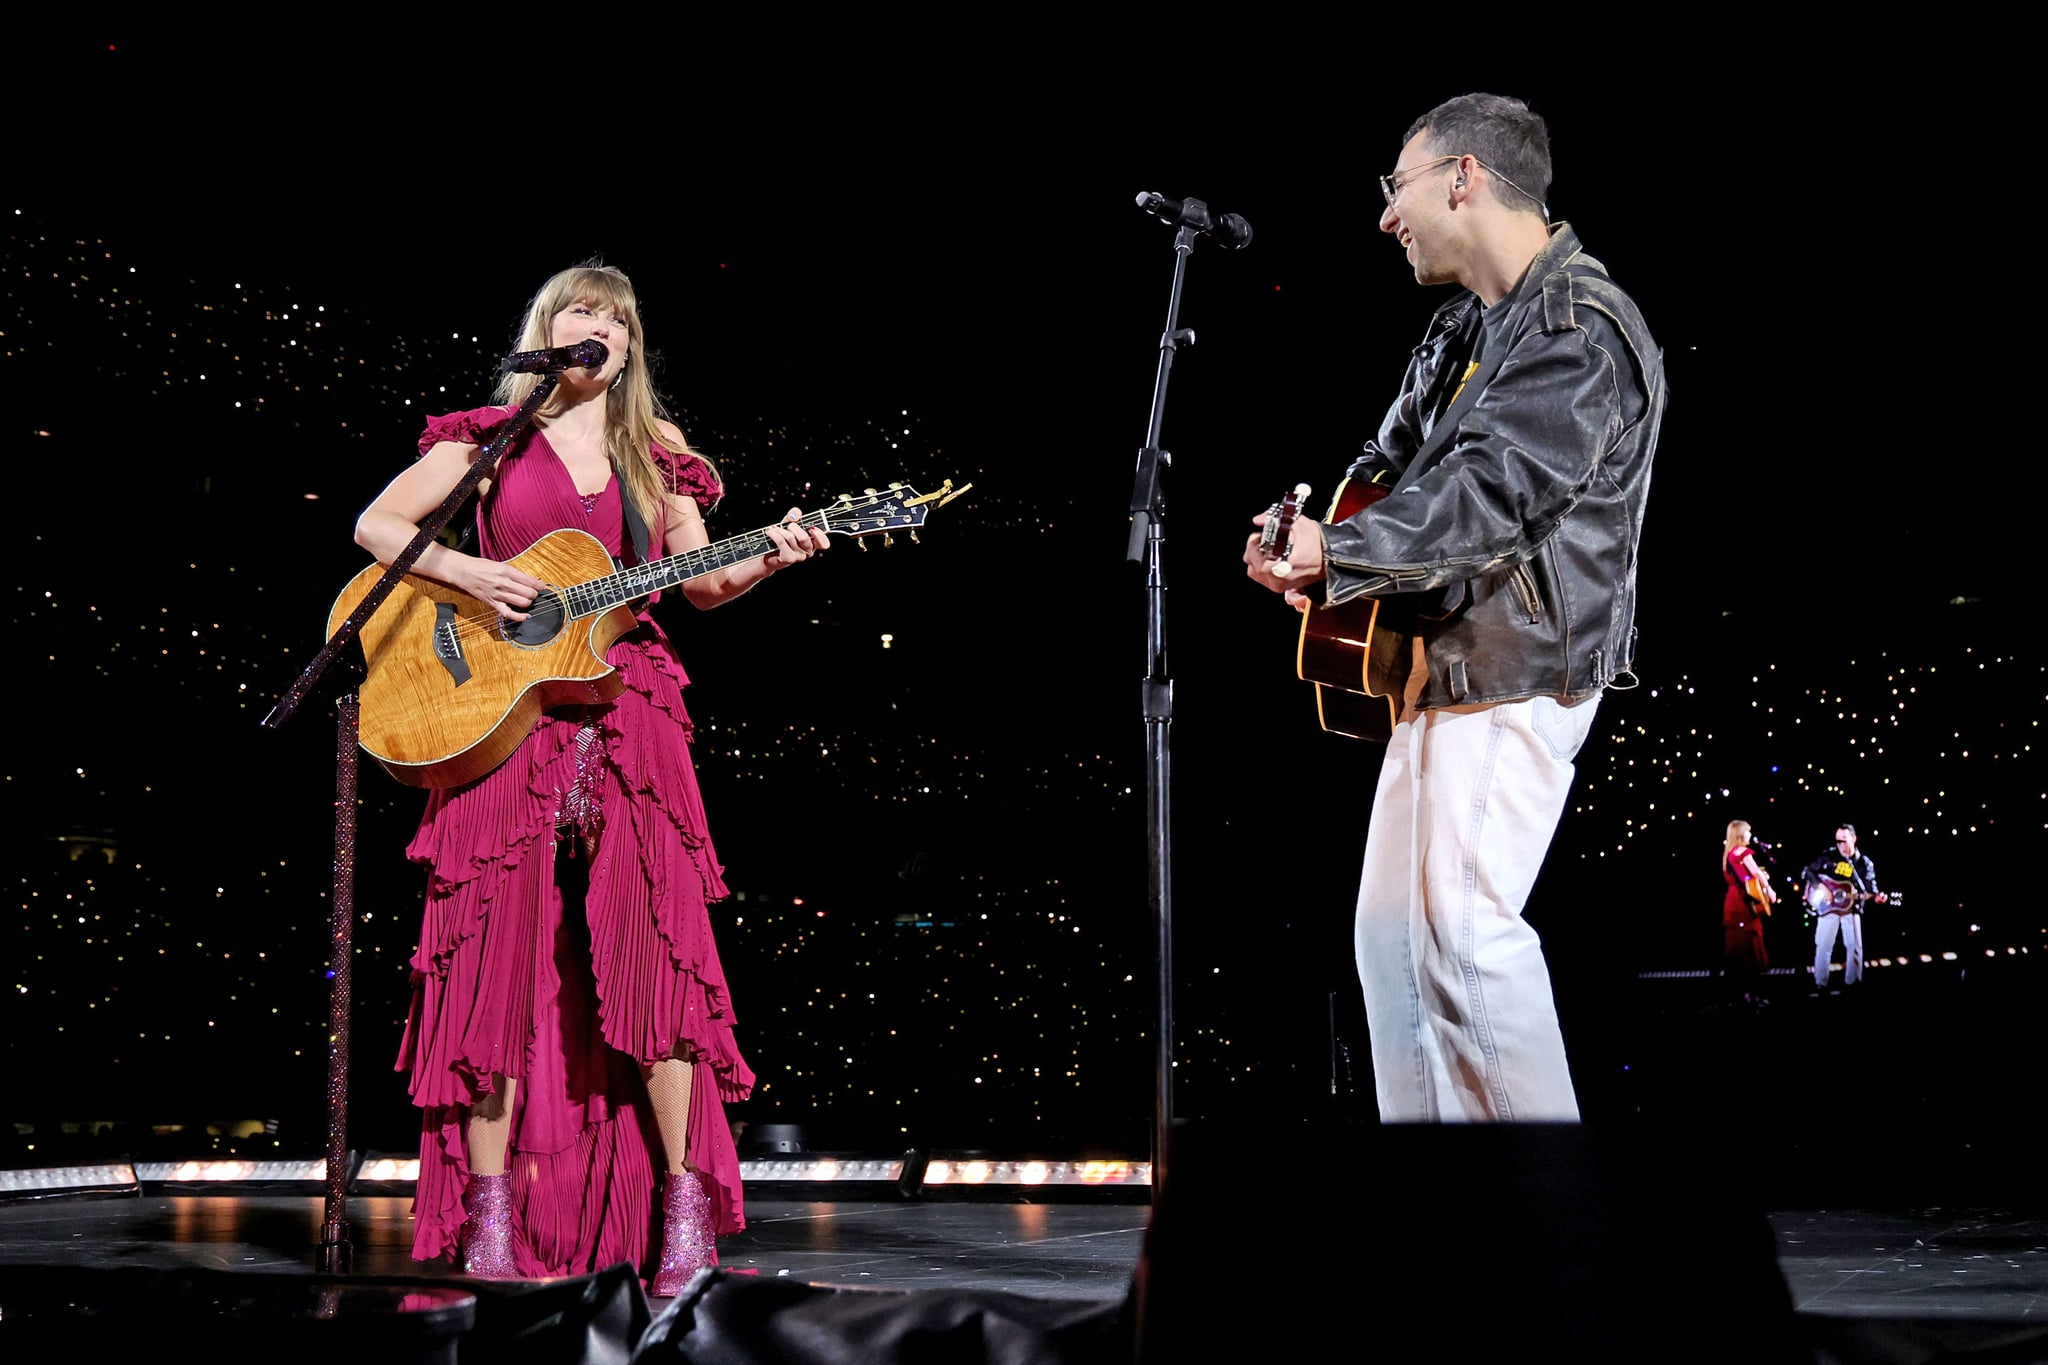  EDITORIAL USE ONLY. NO BOOK COVERS. Taylor Swift and Jack Antonoff perform onstage during 